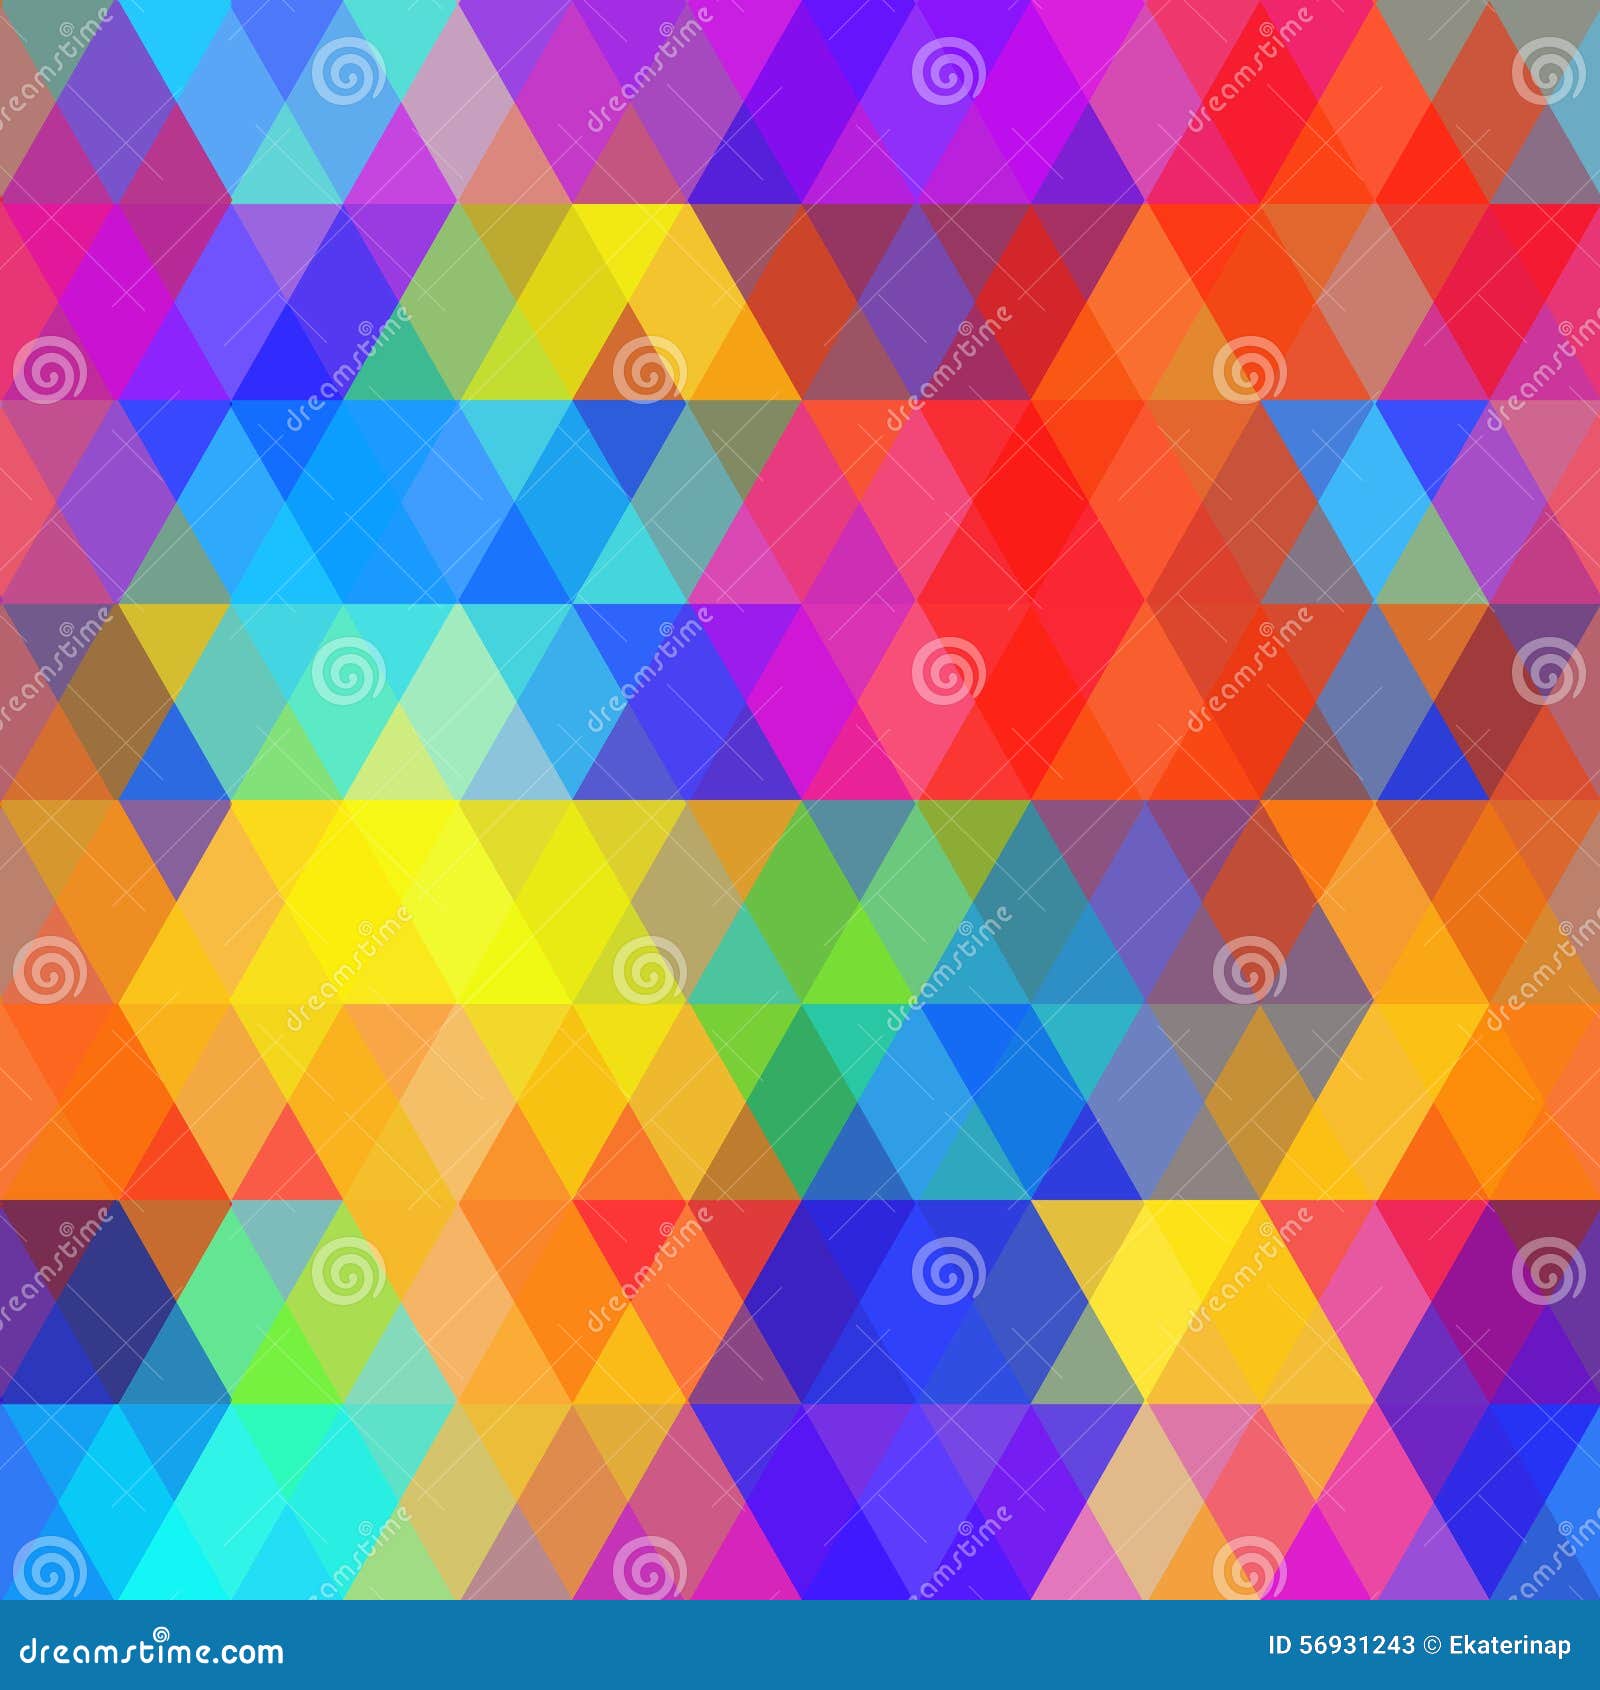 abstract hipsters seamless pattern with bright colored rhombus. geometric background rainbow color. 